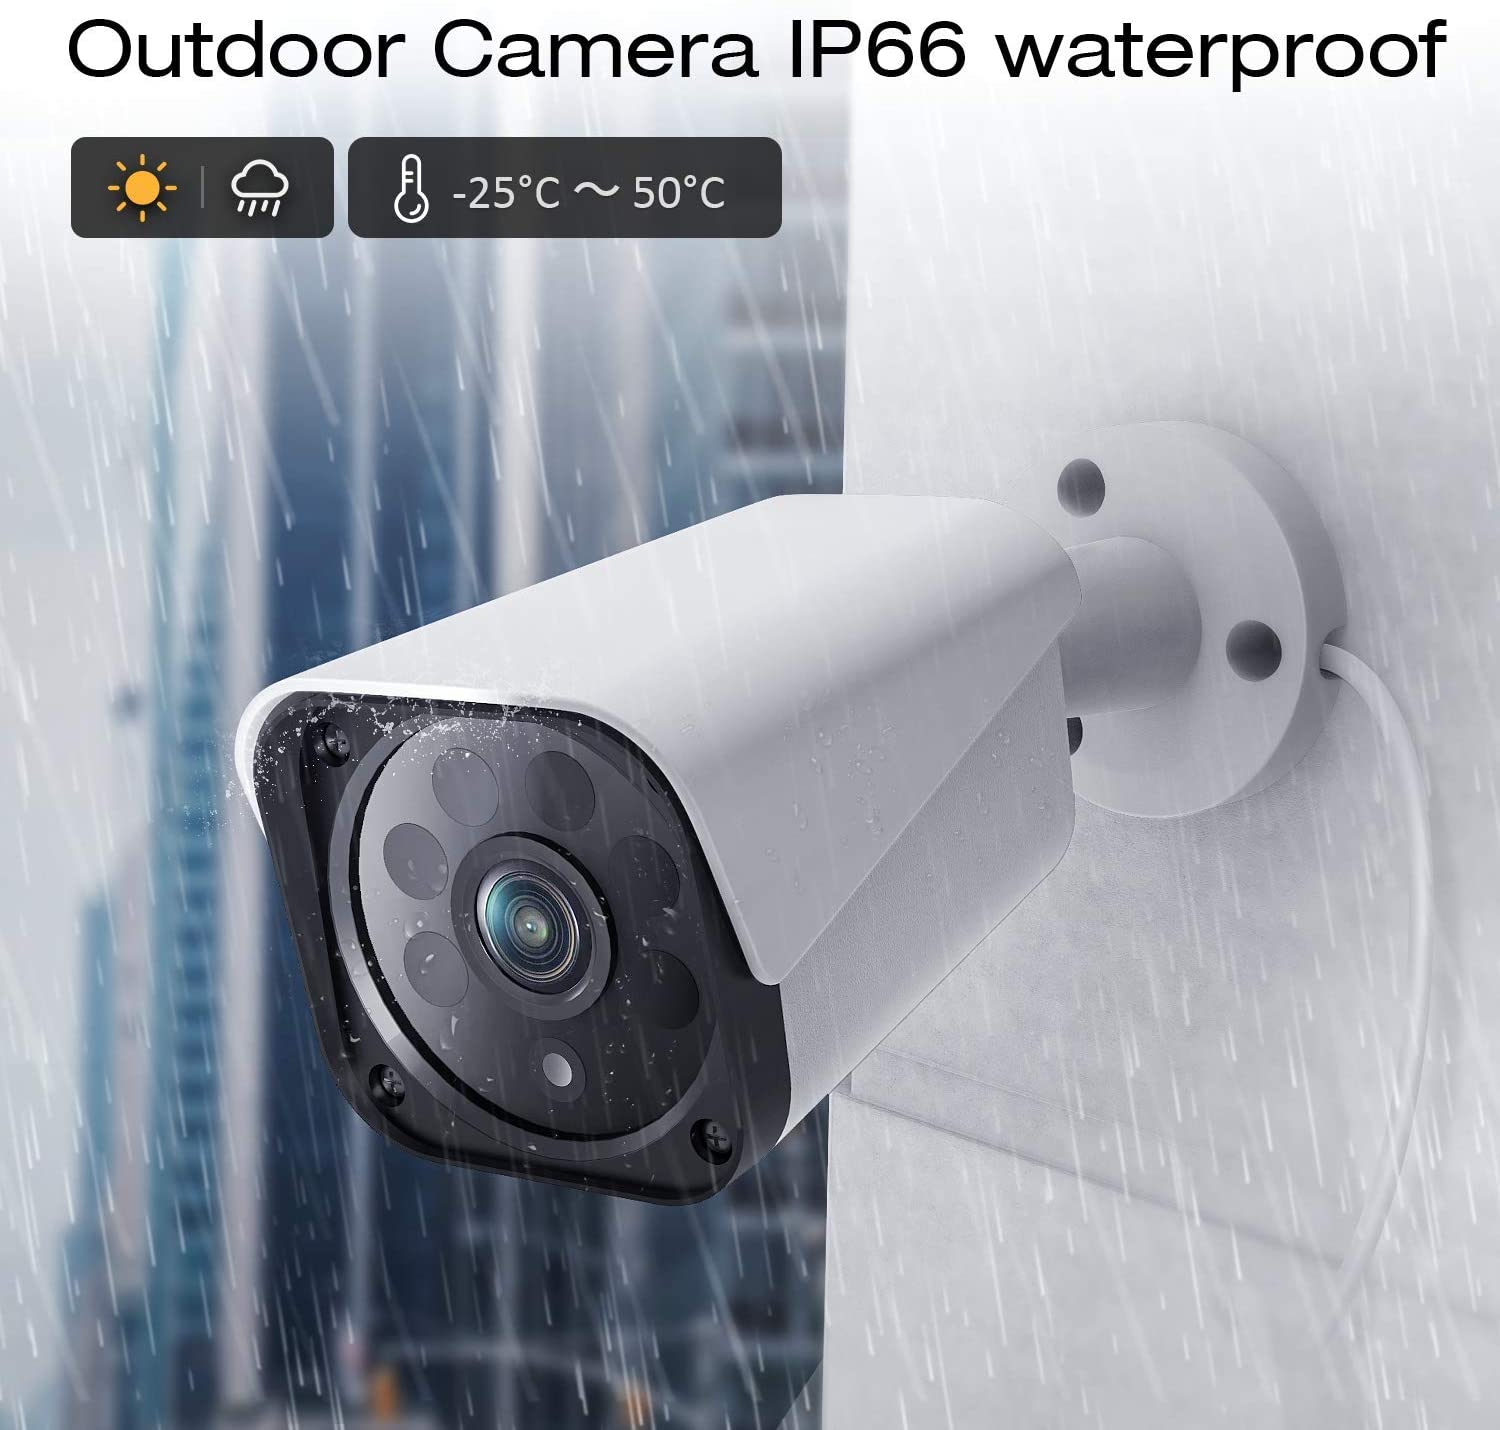 Toguard W208 8CH 1080P Outdoor Lite Wired DVR Security Surveillance Cameras (Only Available In Australia)